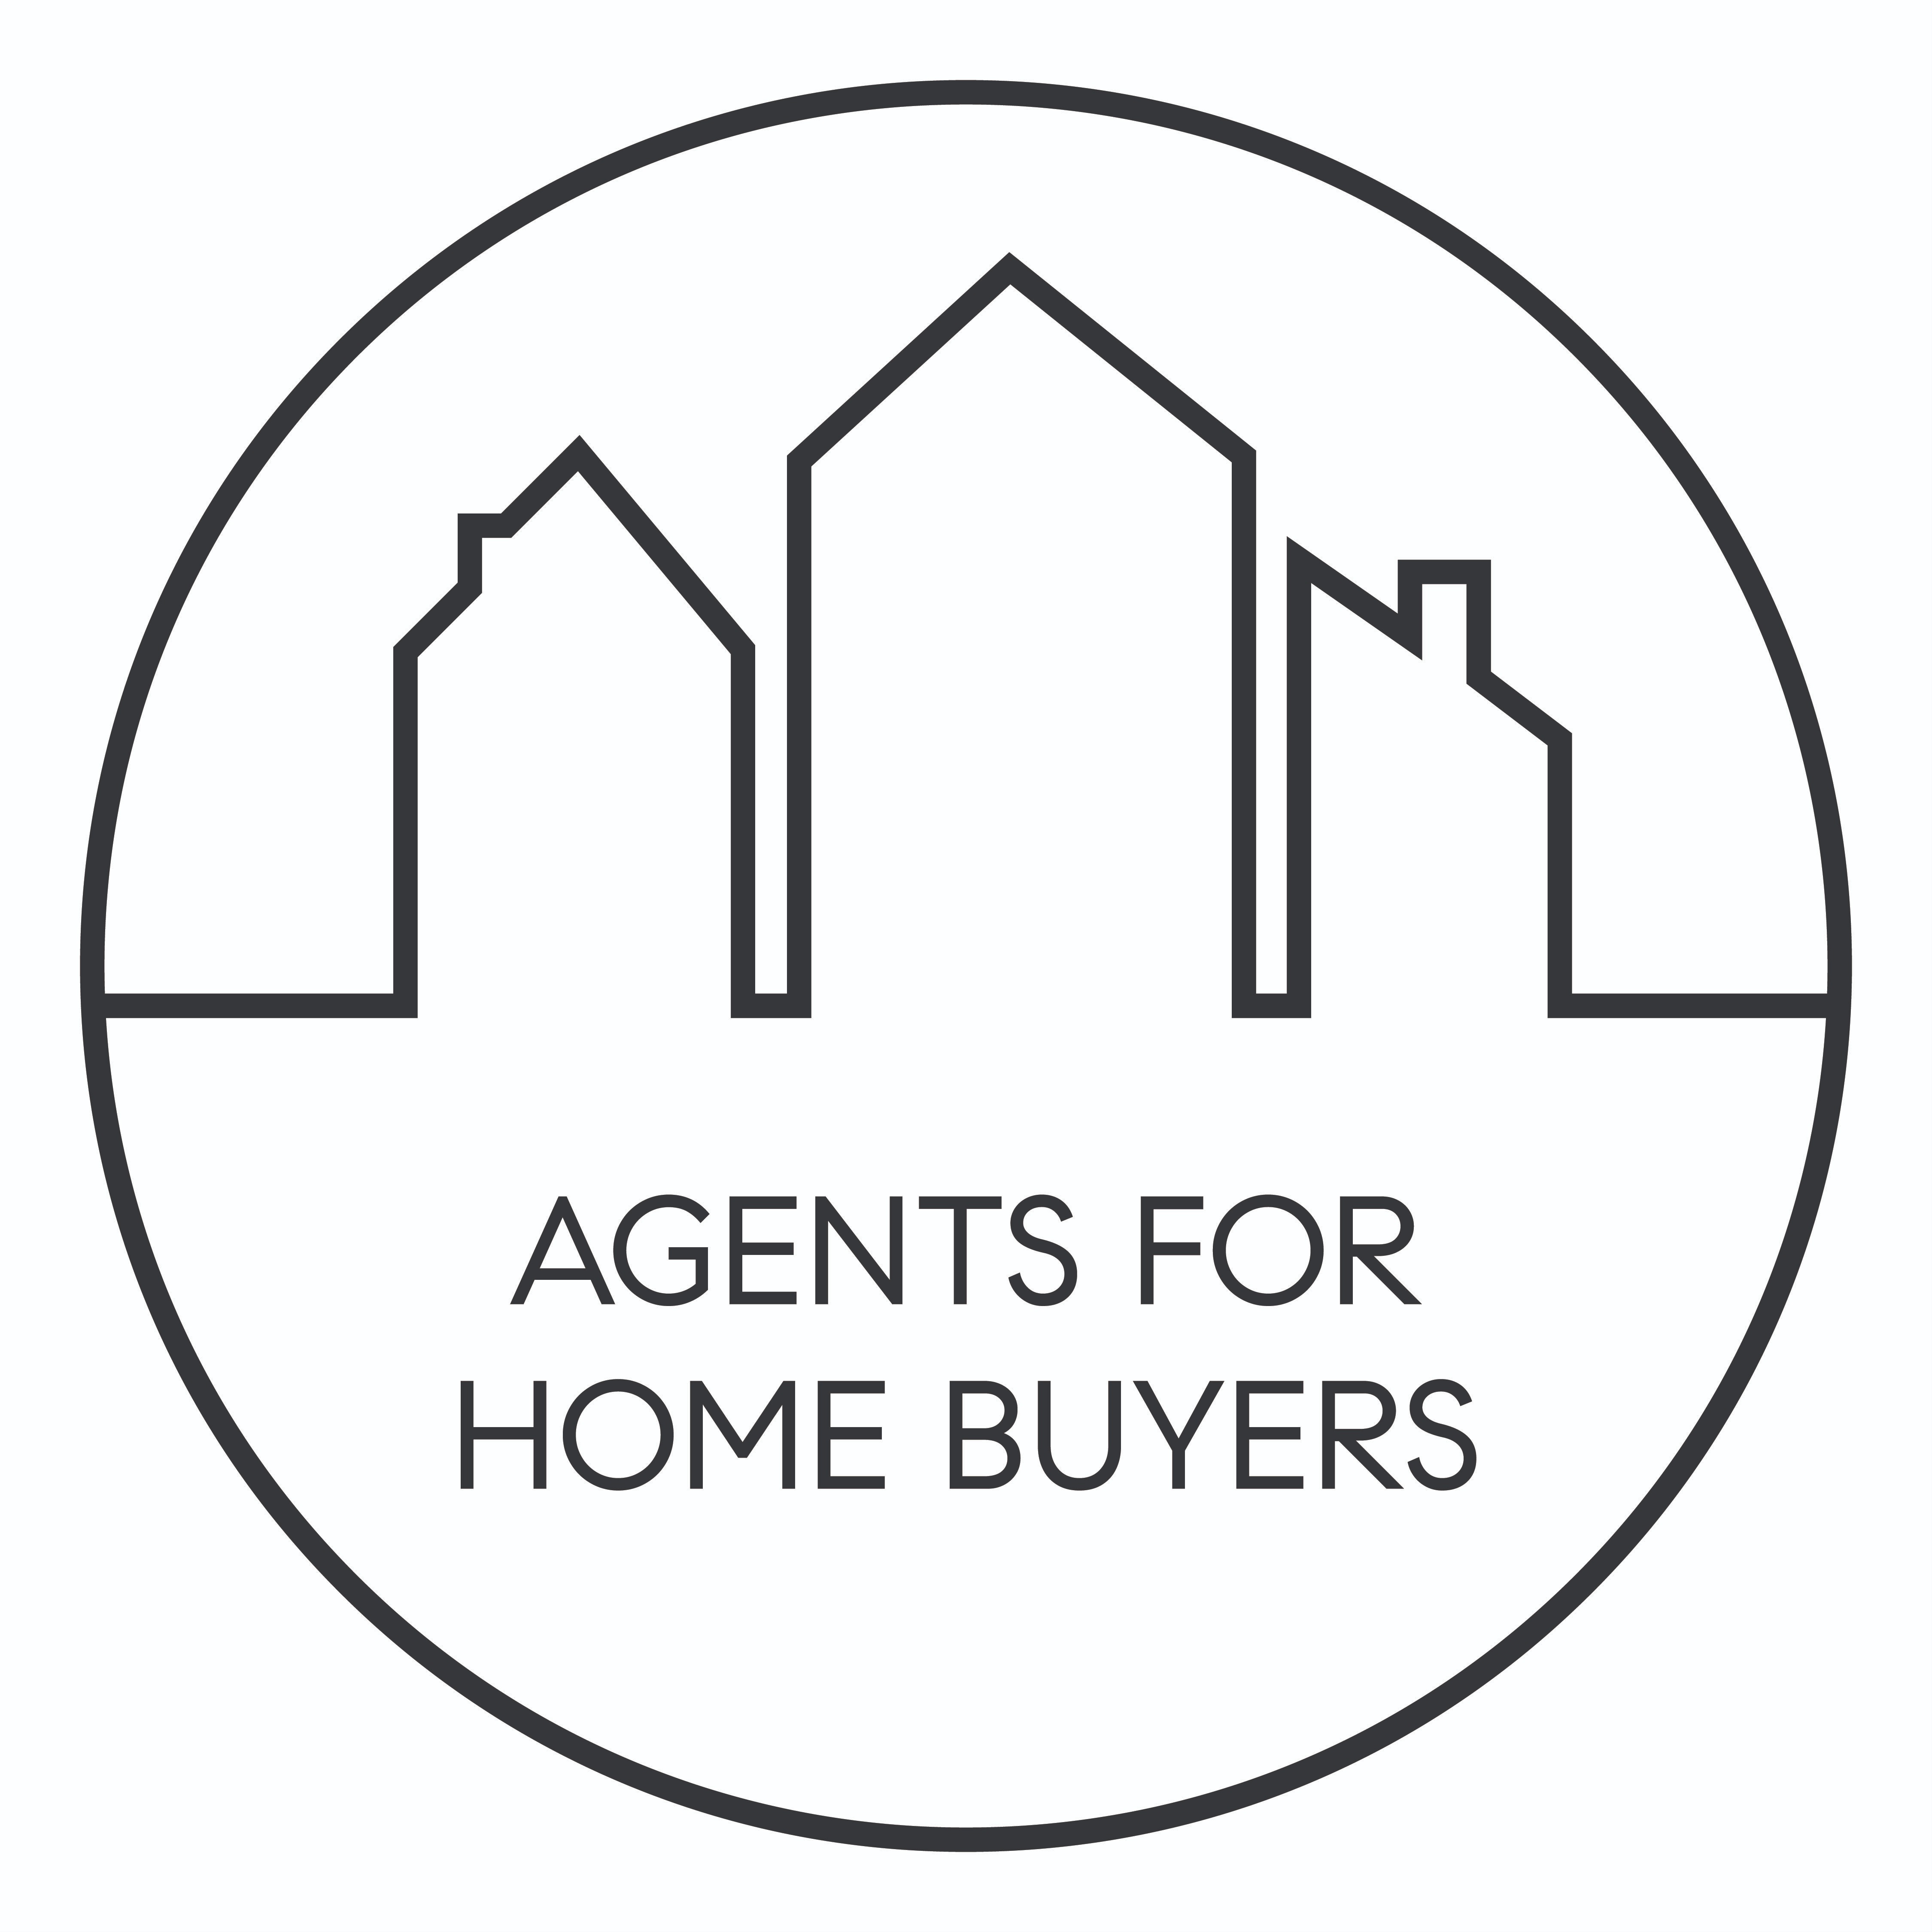 Agents For Home Buyers's Profile Photo